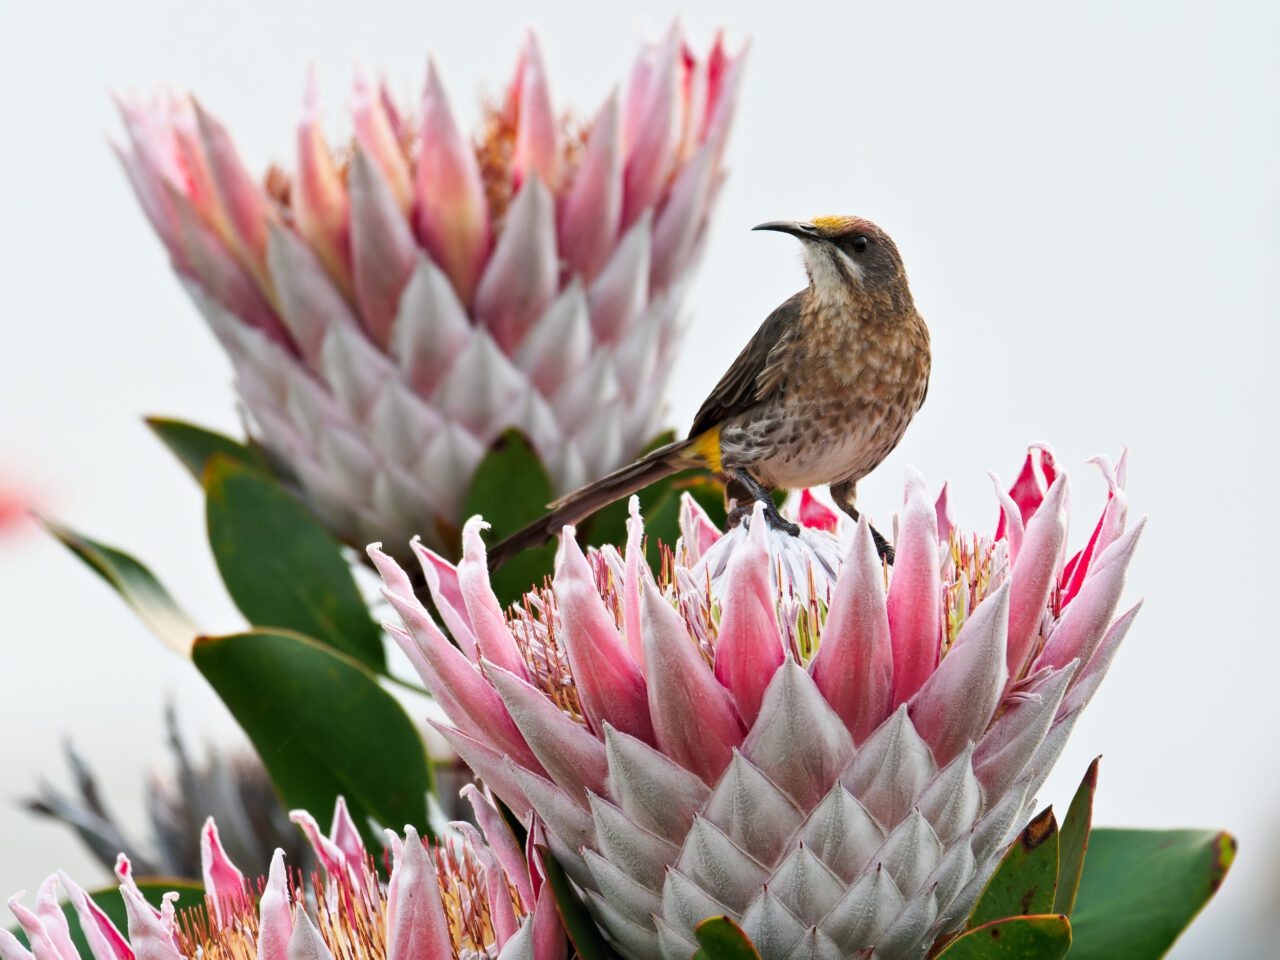 A brown bird with yellow and white patches and a sharp, curved bill, perches on pink, spikey flowers.